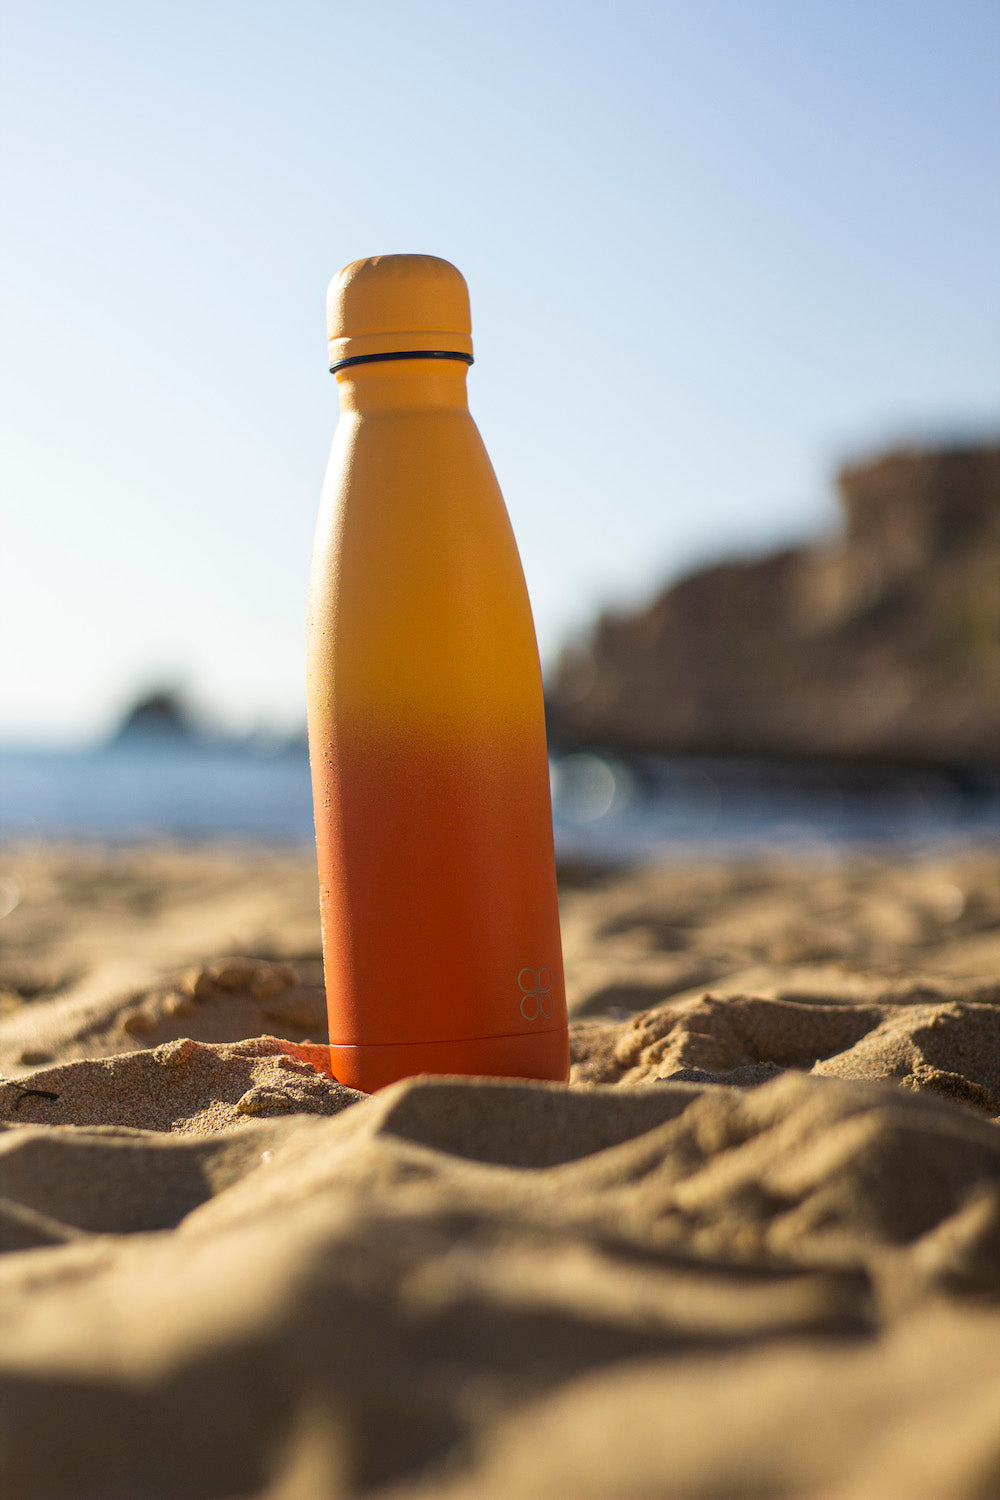 Orange and yellow Water Bottle Sitting On The Golden Sands Beach in Malta.